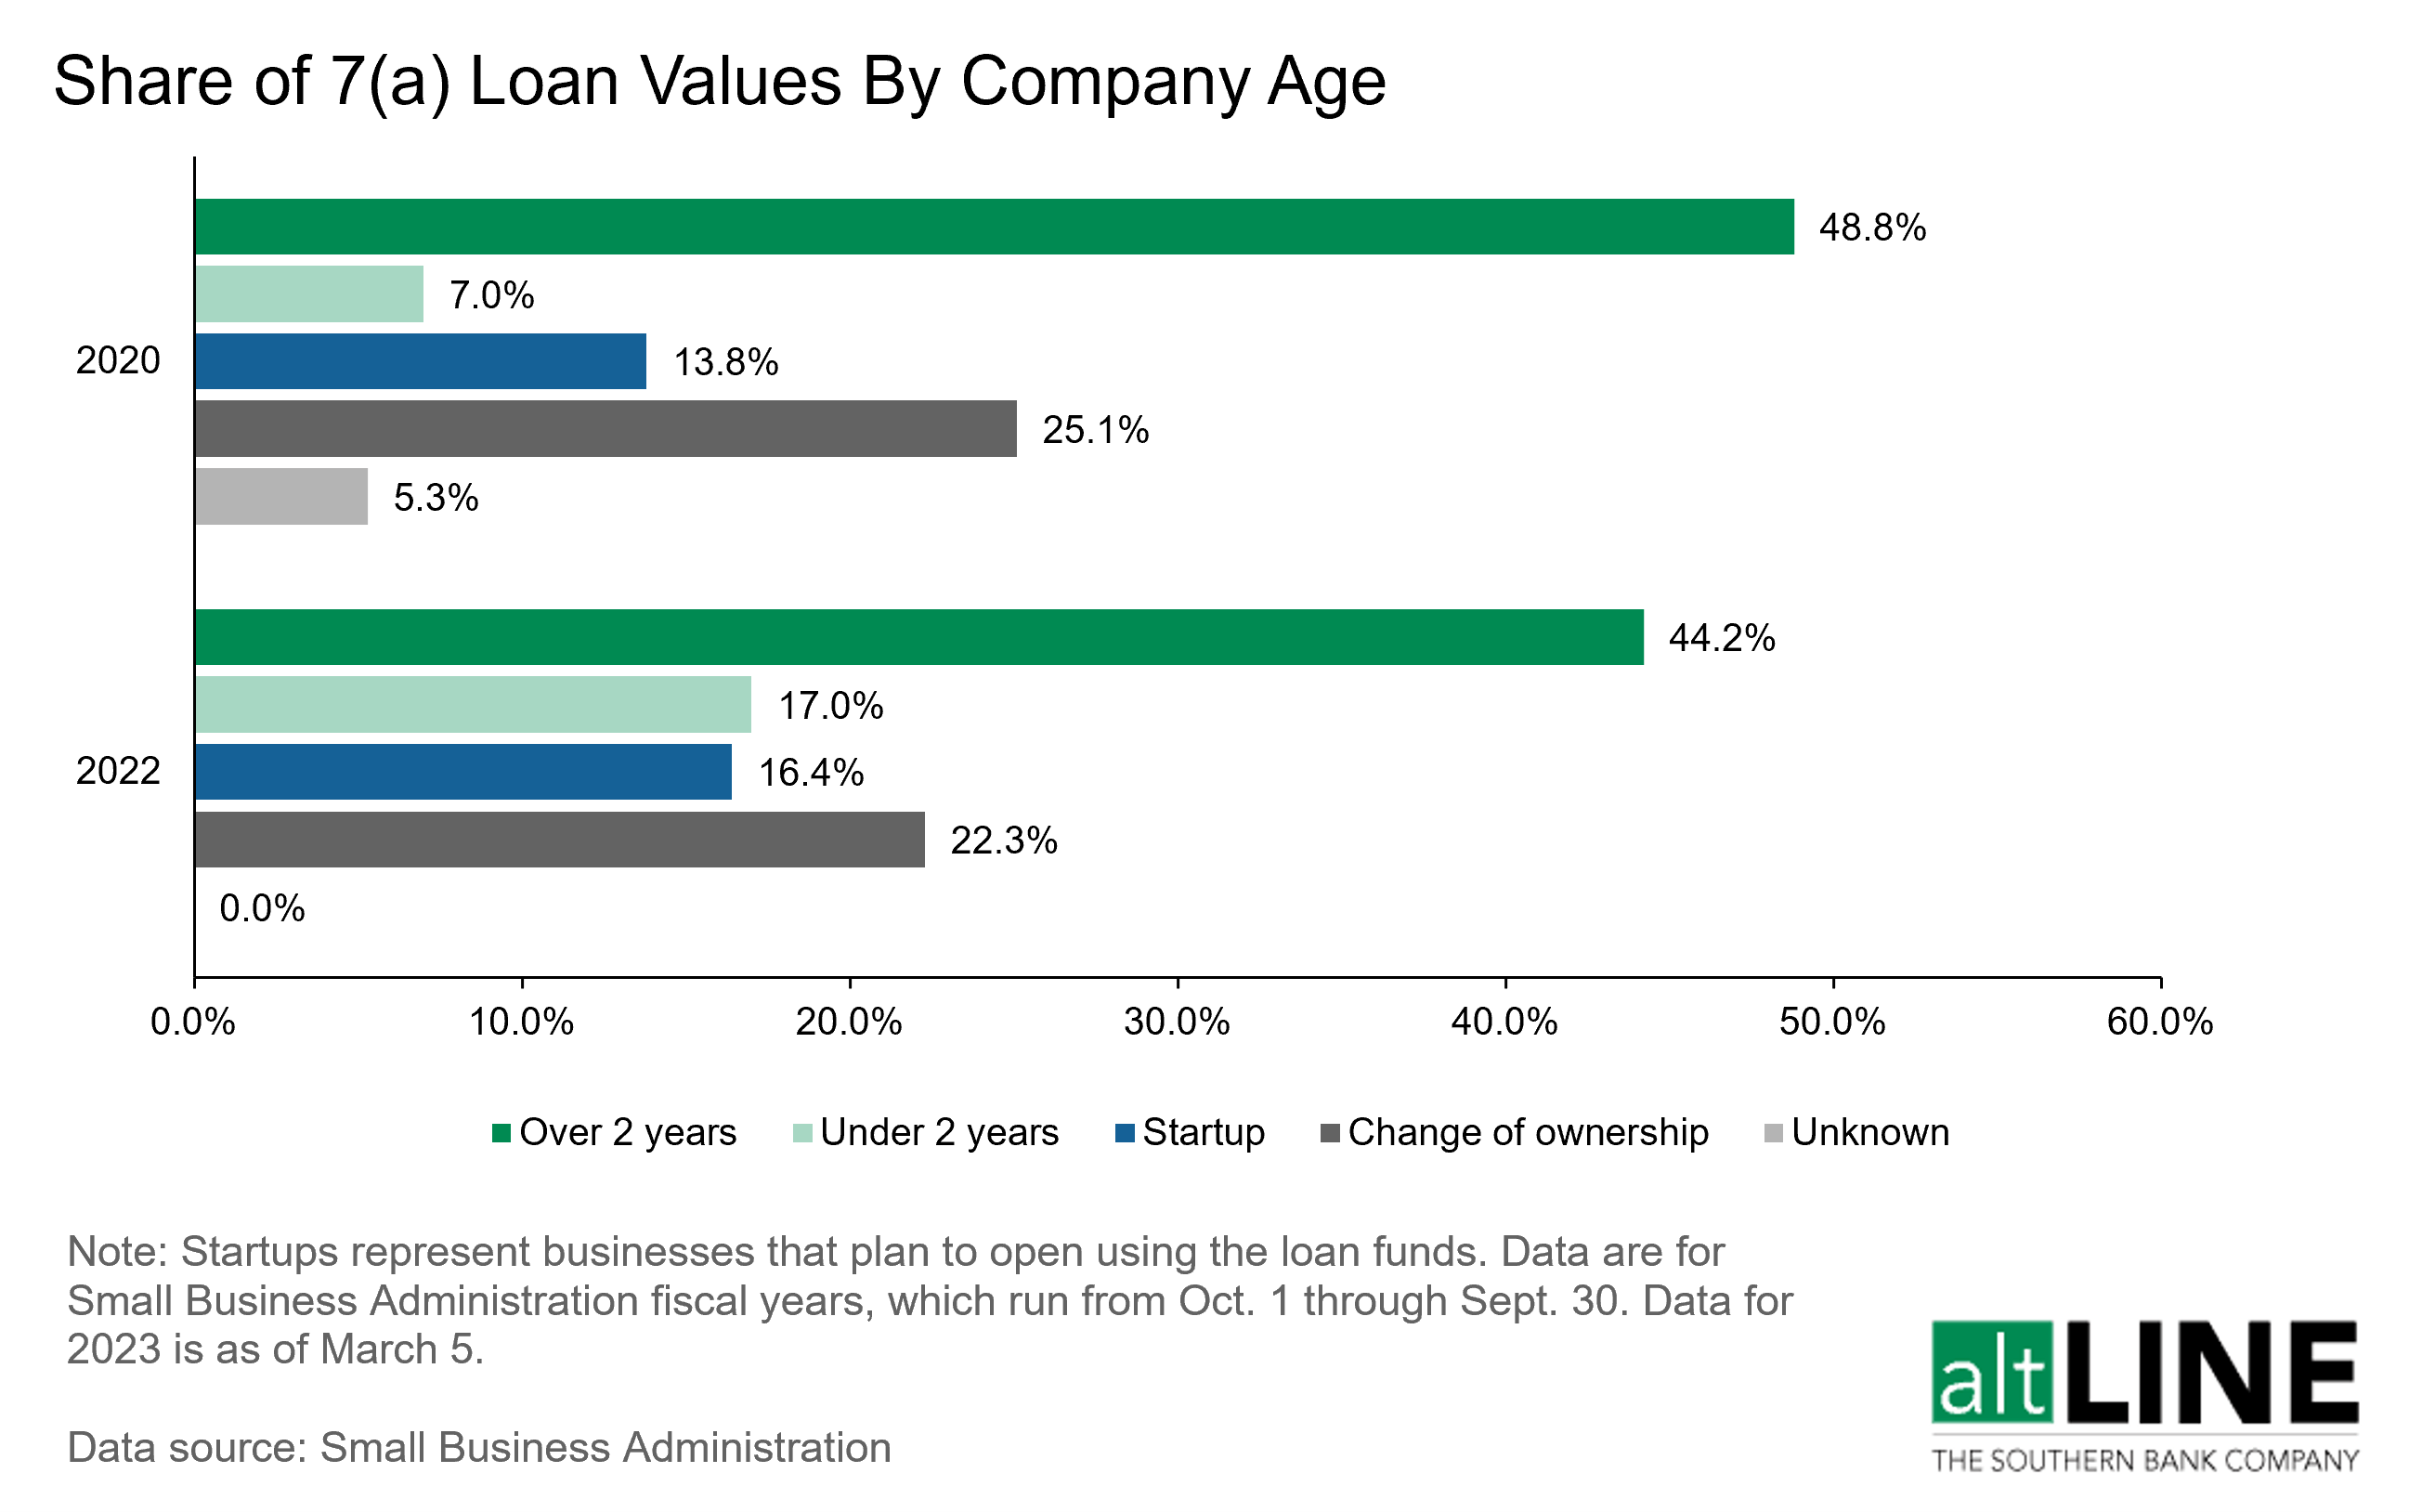 chart showing the share of 7(a) loans by company age